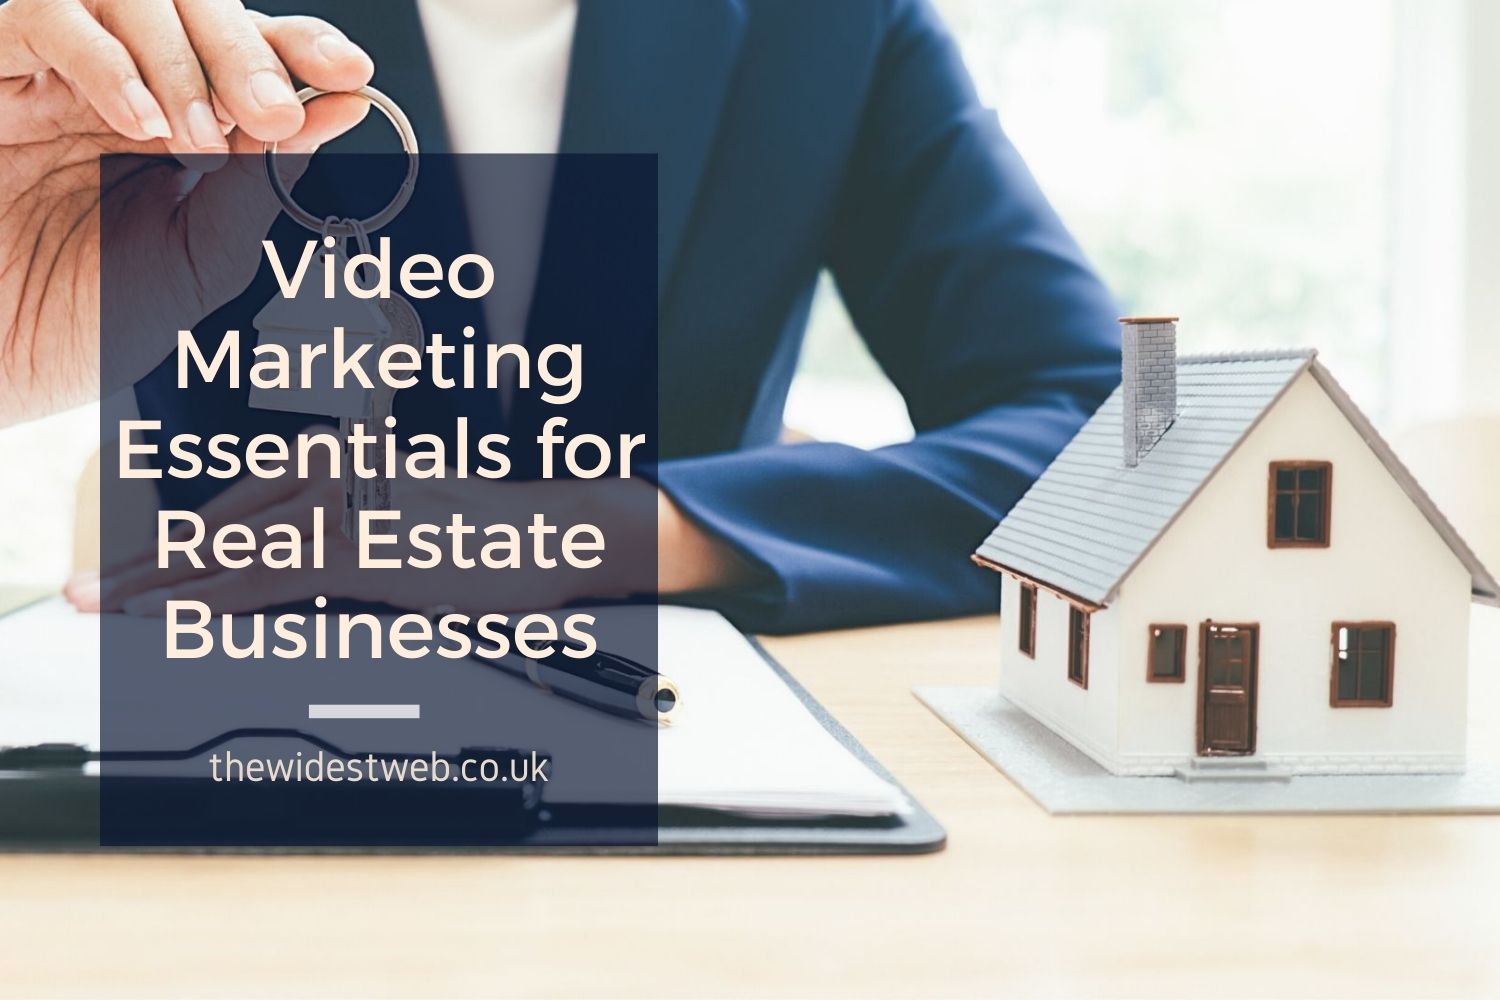 Video Marketing Essentials for Real Estate Businesses: Everything You Need to Know